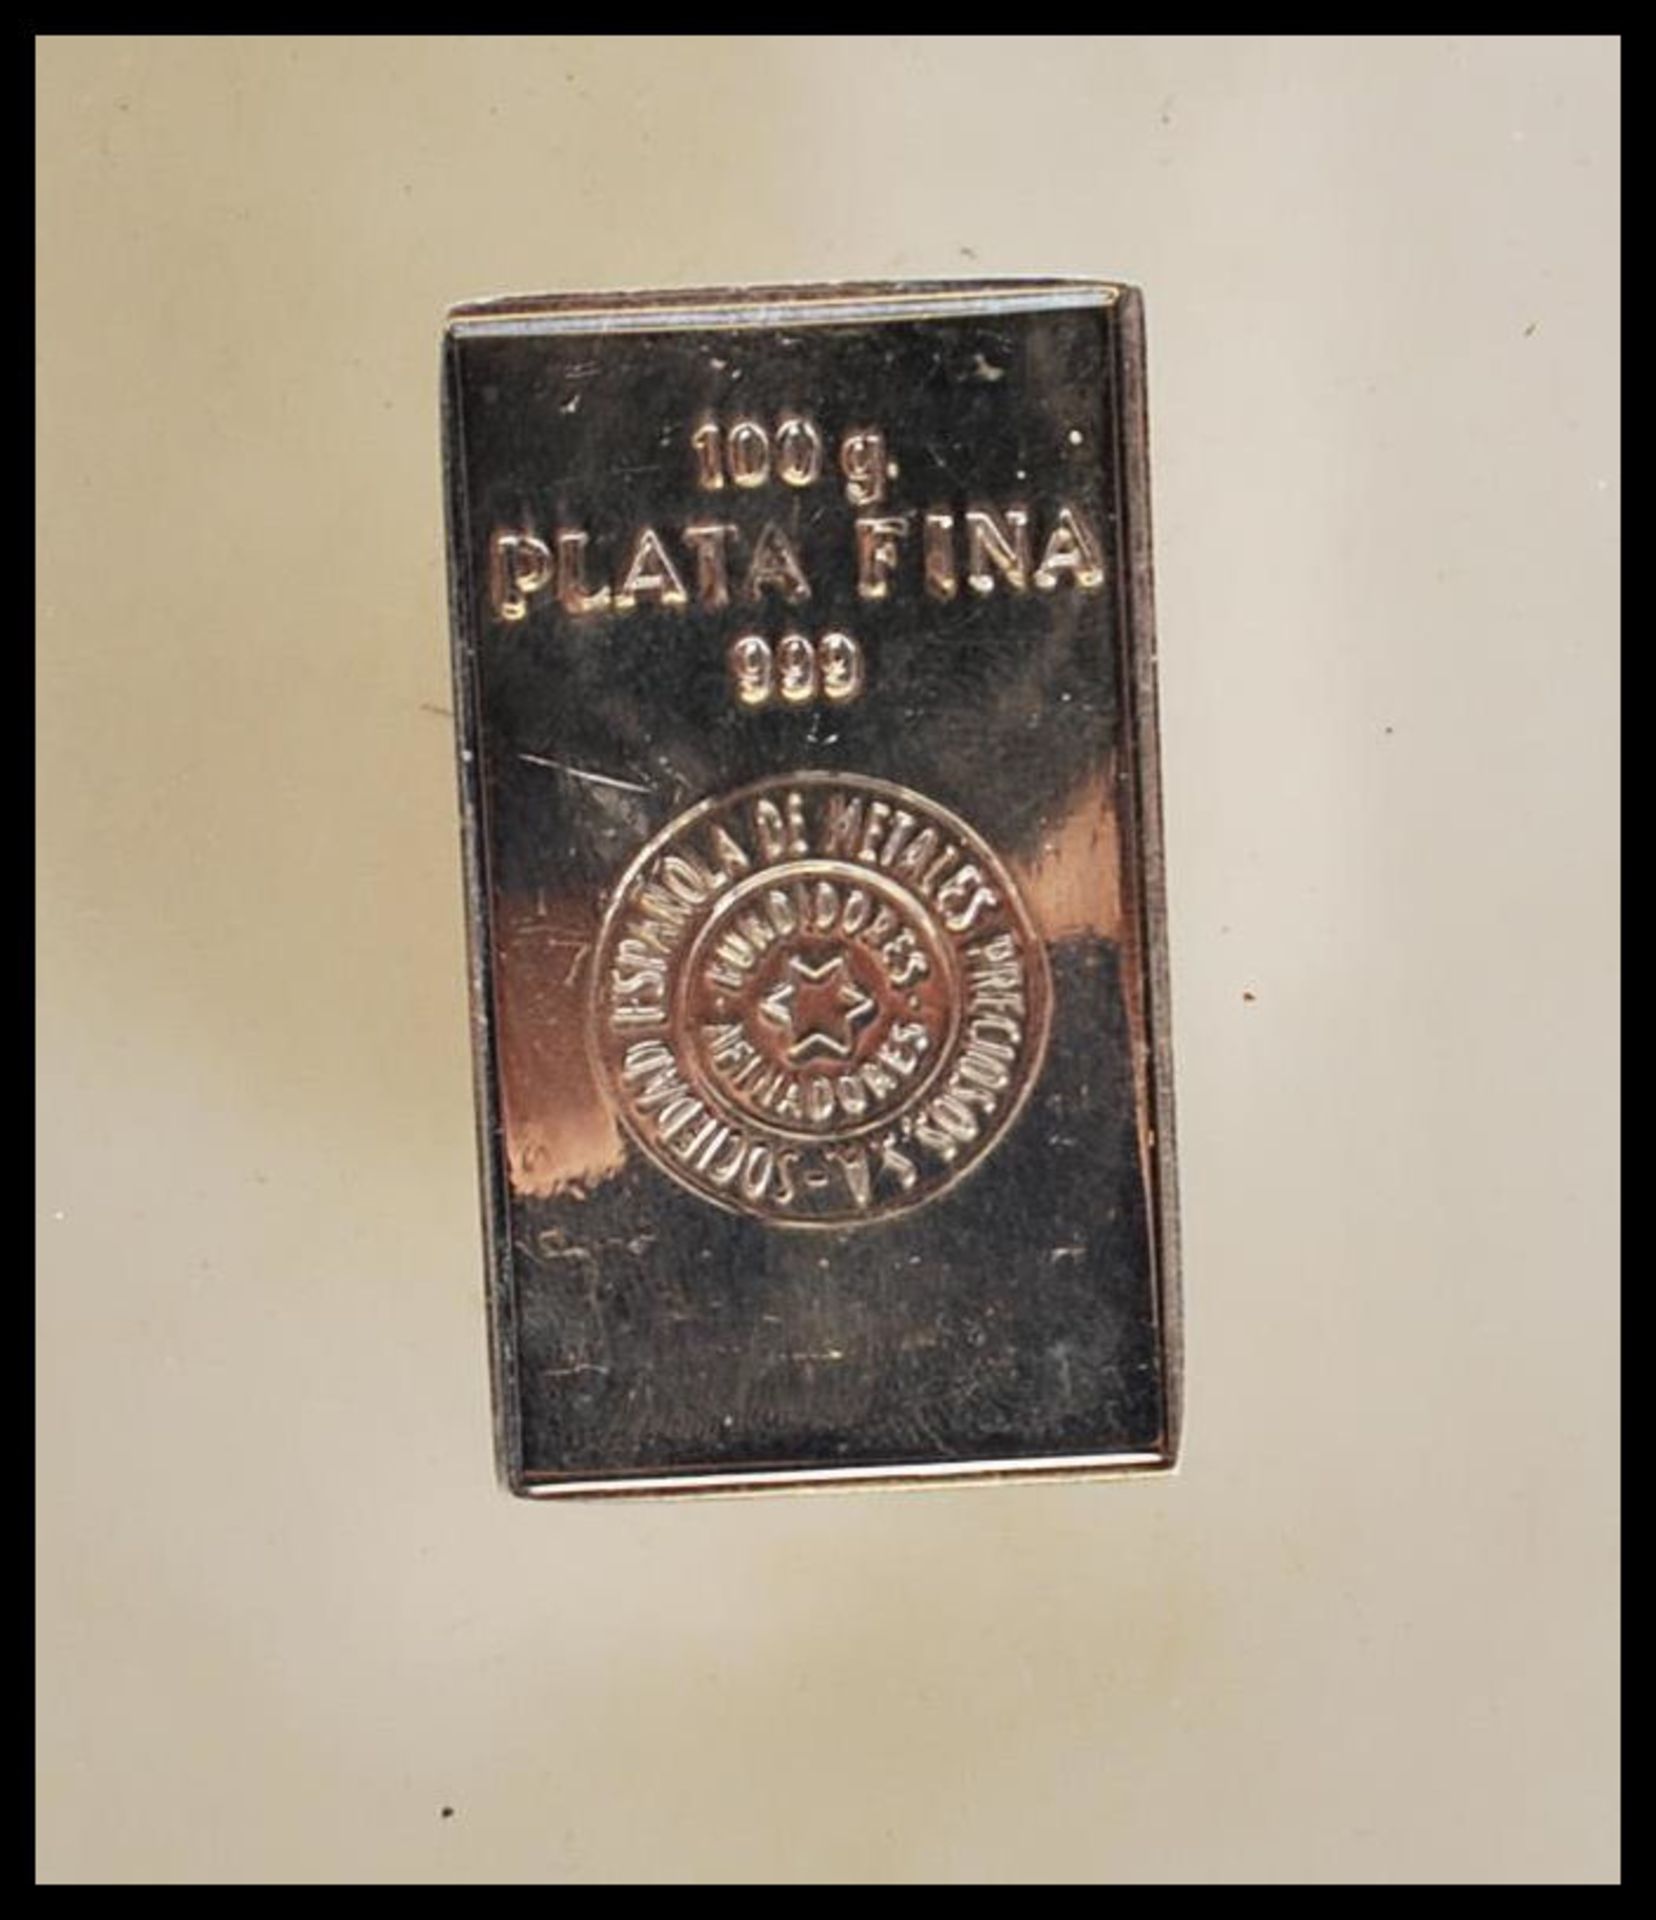 A 999 fine silver 100g ingot. Stamped with Spanish Authentication circular mark 'Espanola De